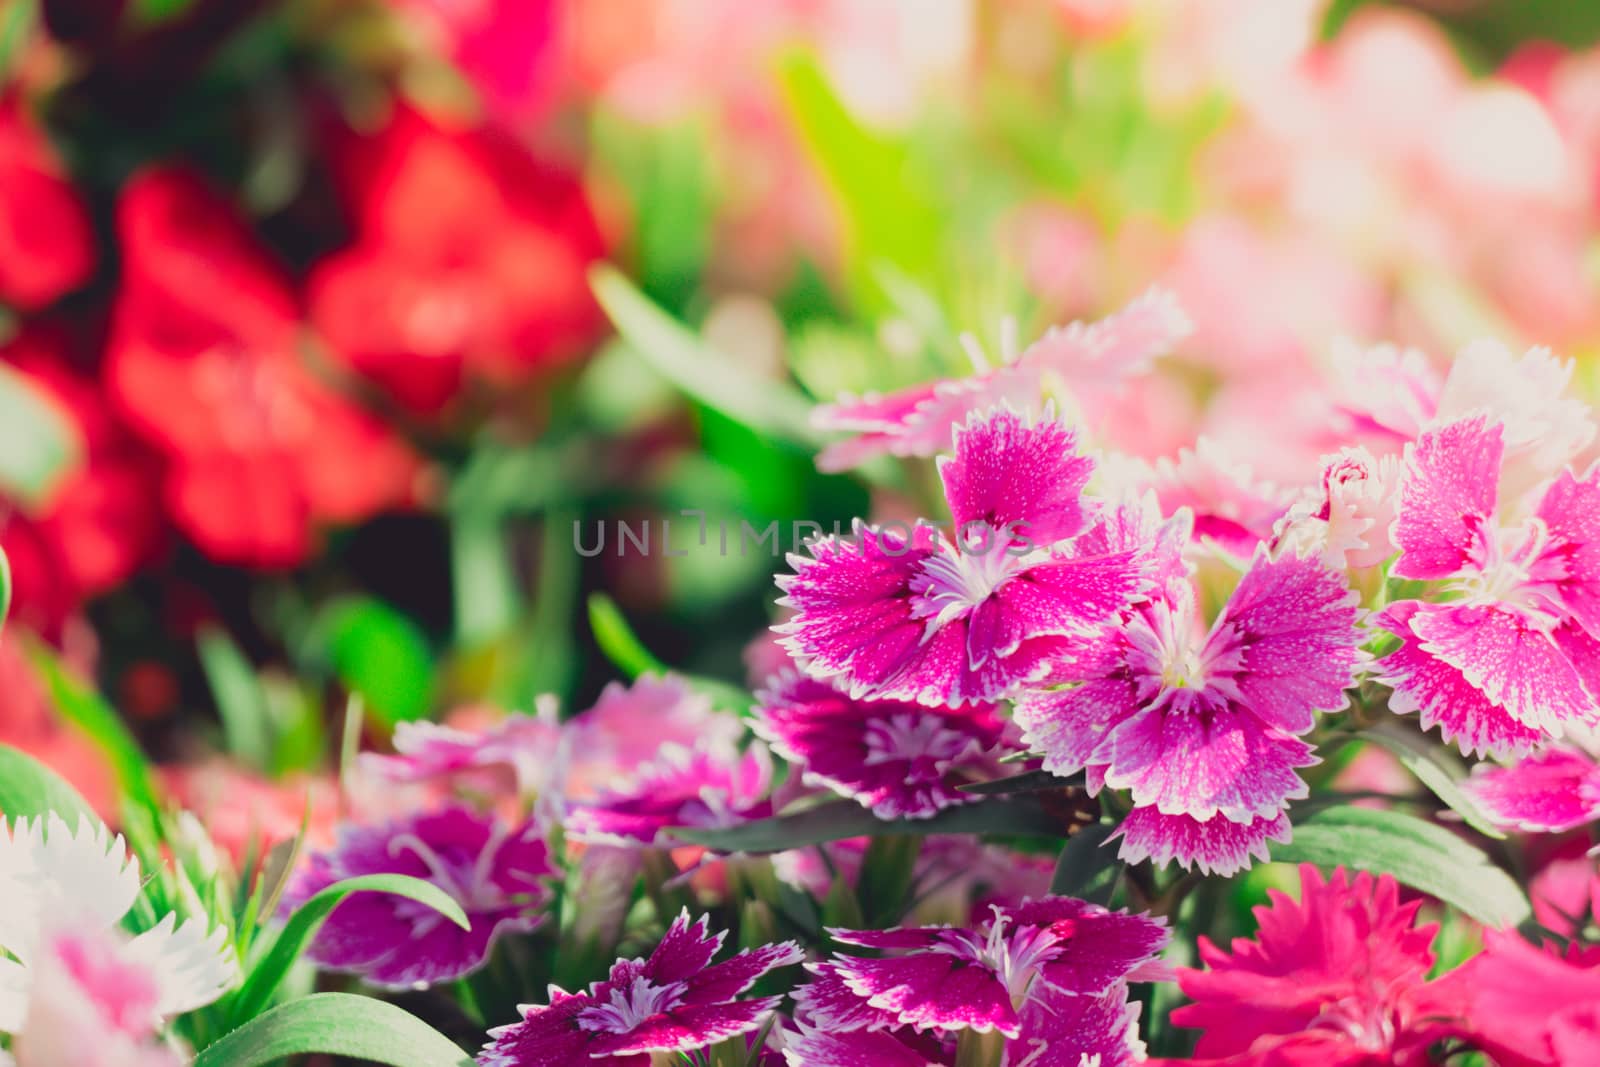 The background image of the colorful flowers by teerawit